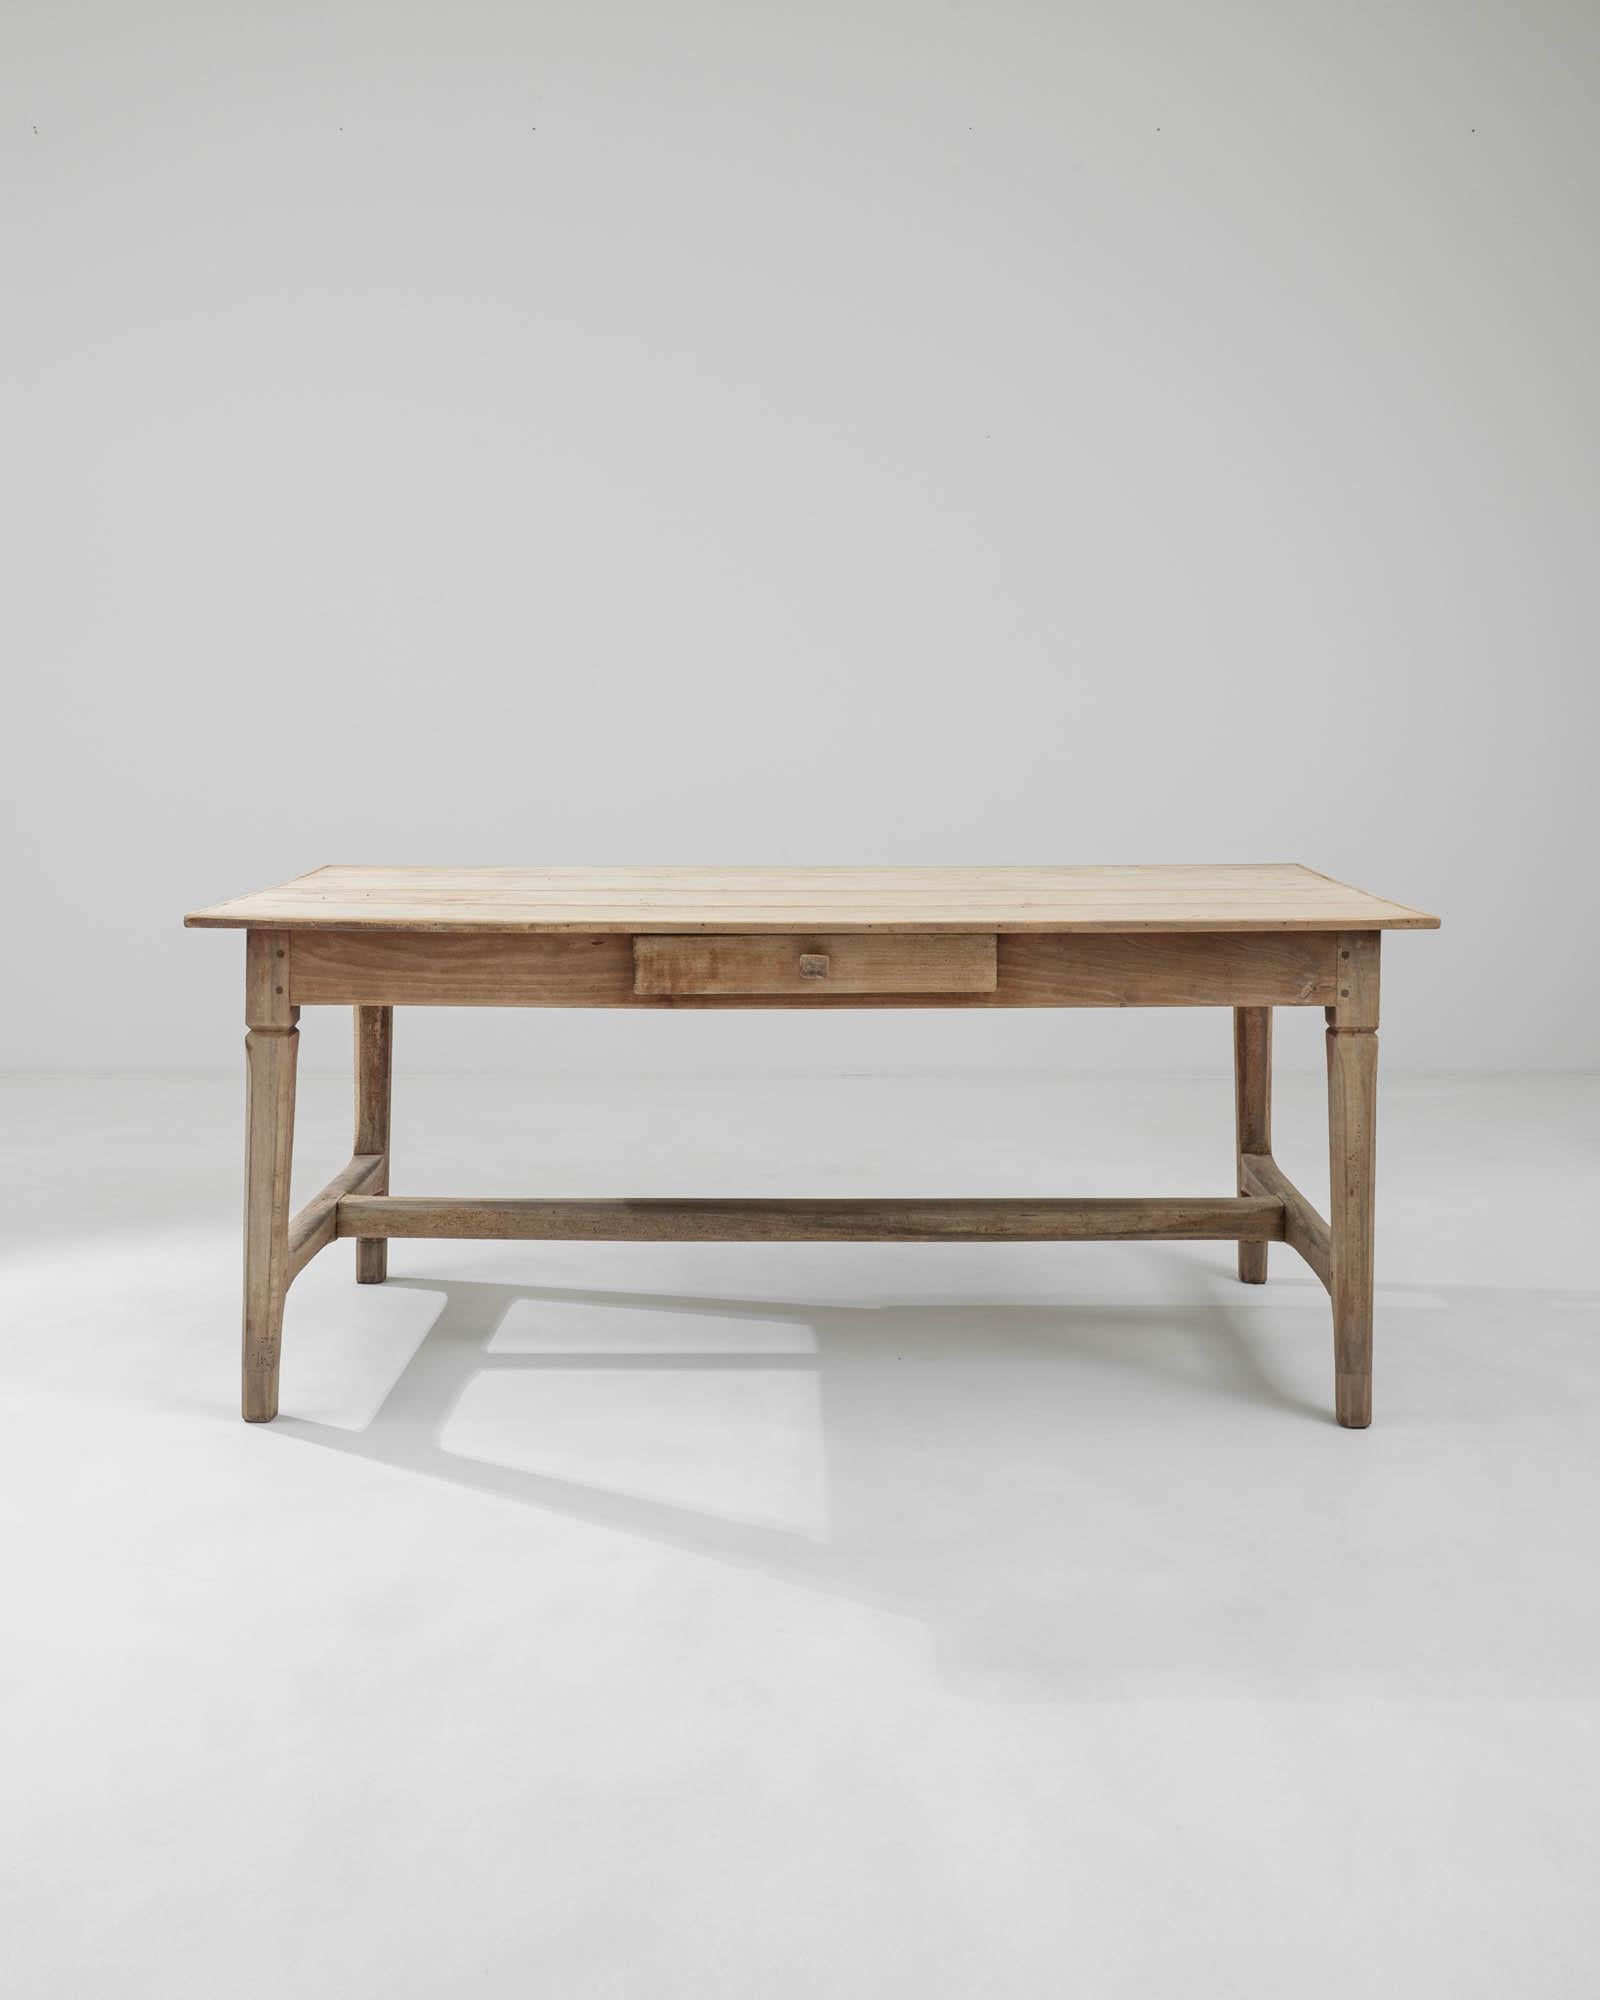 A wooden table created in 1900s France. This expansive dining table emits a cheery glow, both attractive as a rustic farmhouse piece and a minimalistic construction. Its colloquial charm stems from the mortise and tenon joints, dowel pegs, and other